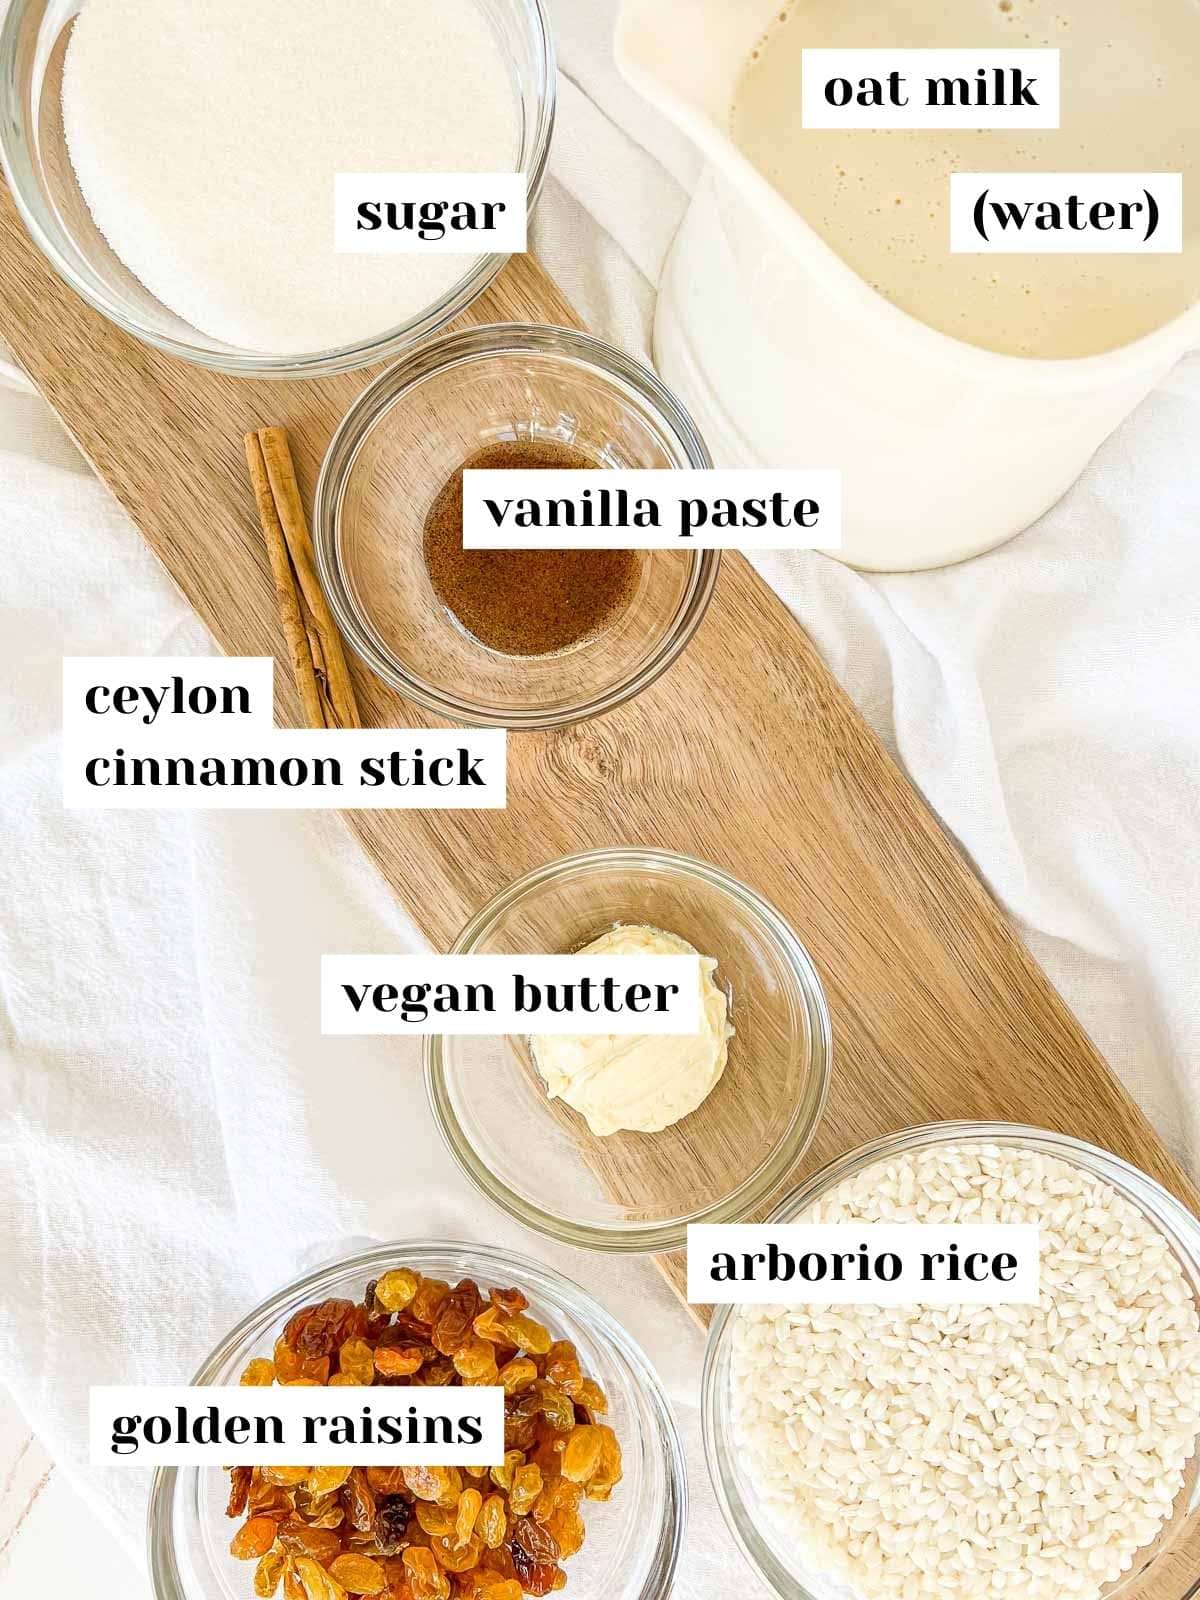 Labeled rice pudding ingredients on a serving board.